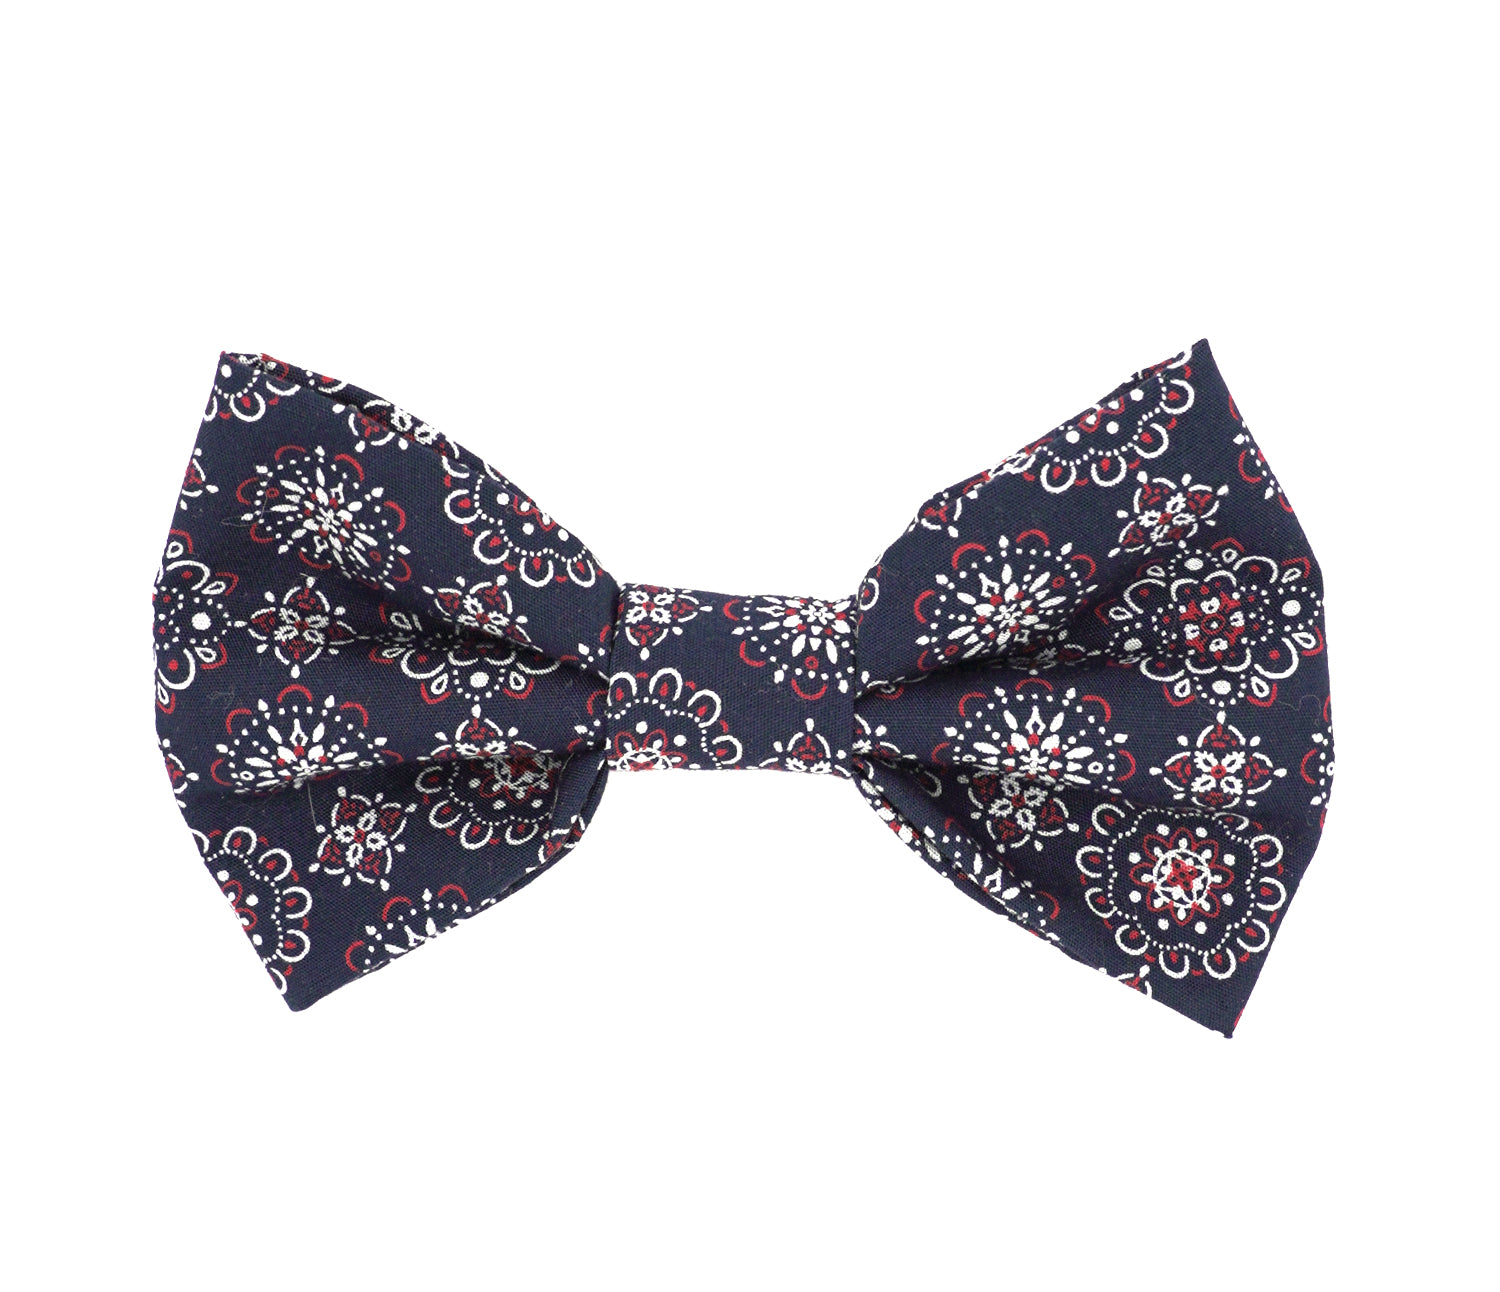 Handmade cotton bow tie for dogs (or other pets). Elastic straps on back with snaps make it easy to add to collar, harness, or leash. Navy blue background with red and white mandalas.